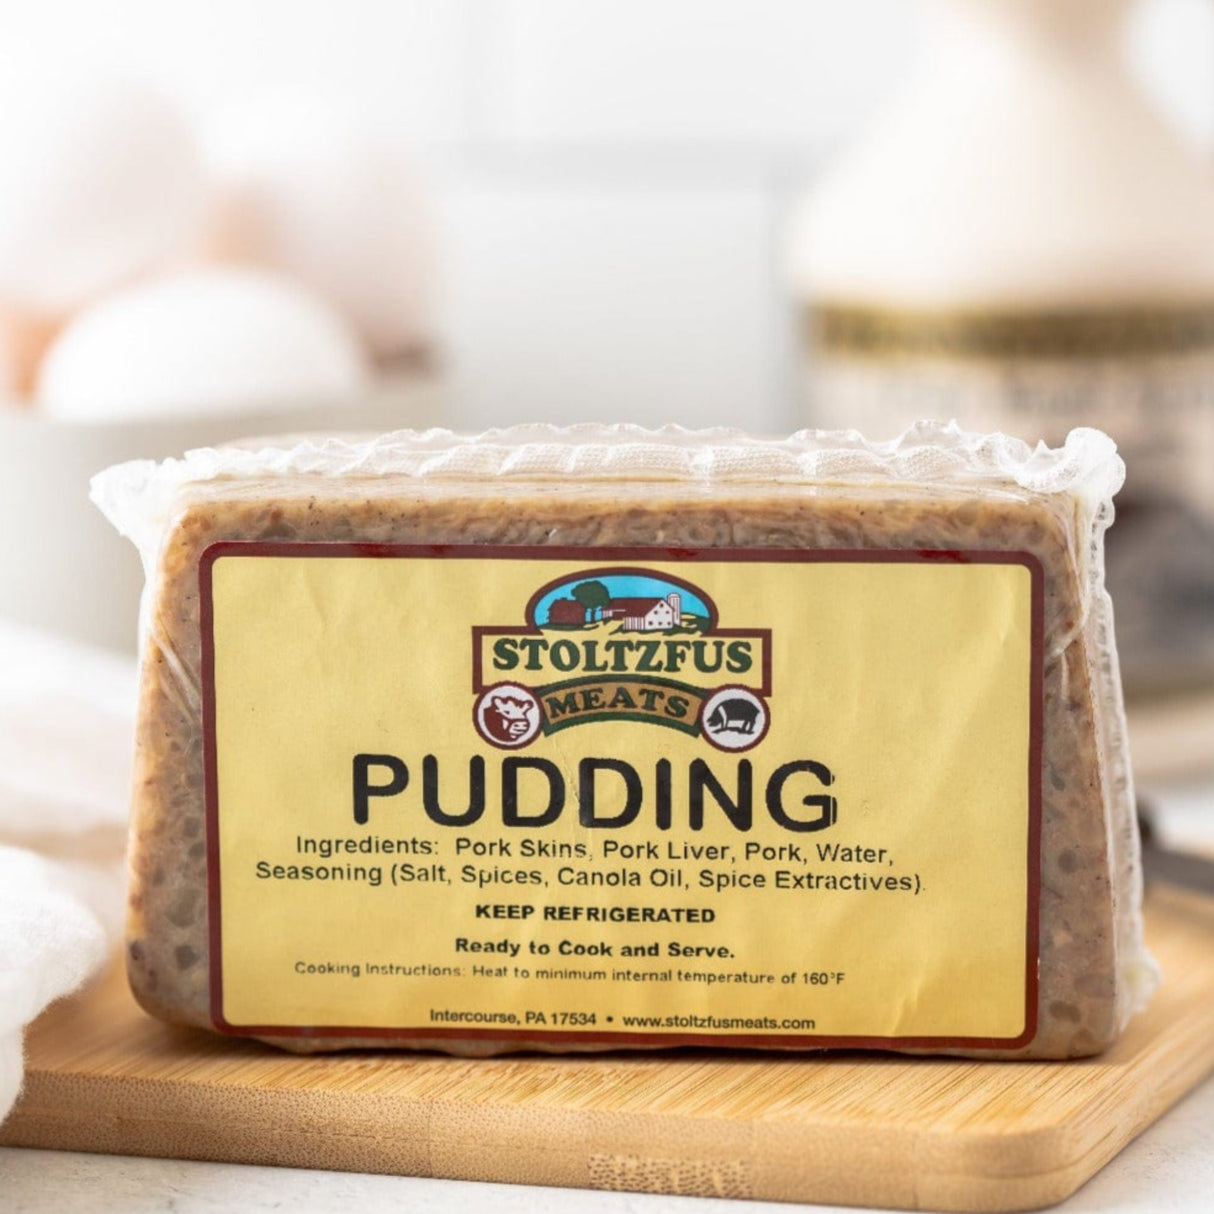 Pudding - Stoltzfus Meats